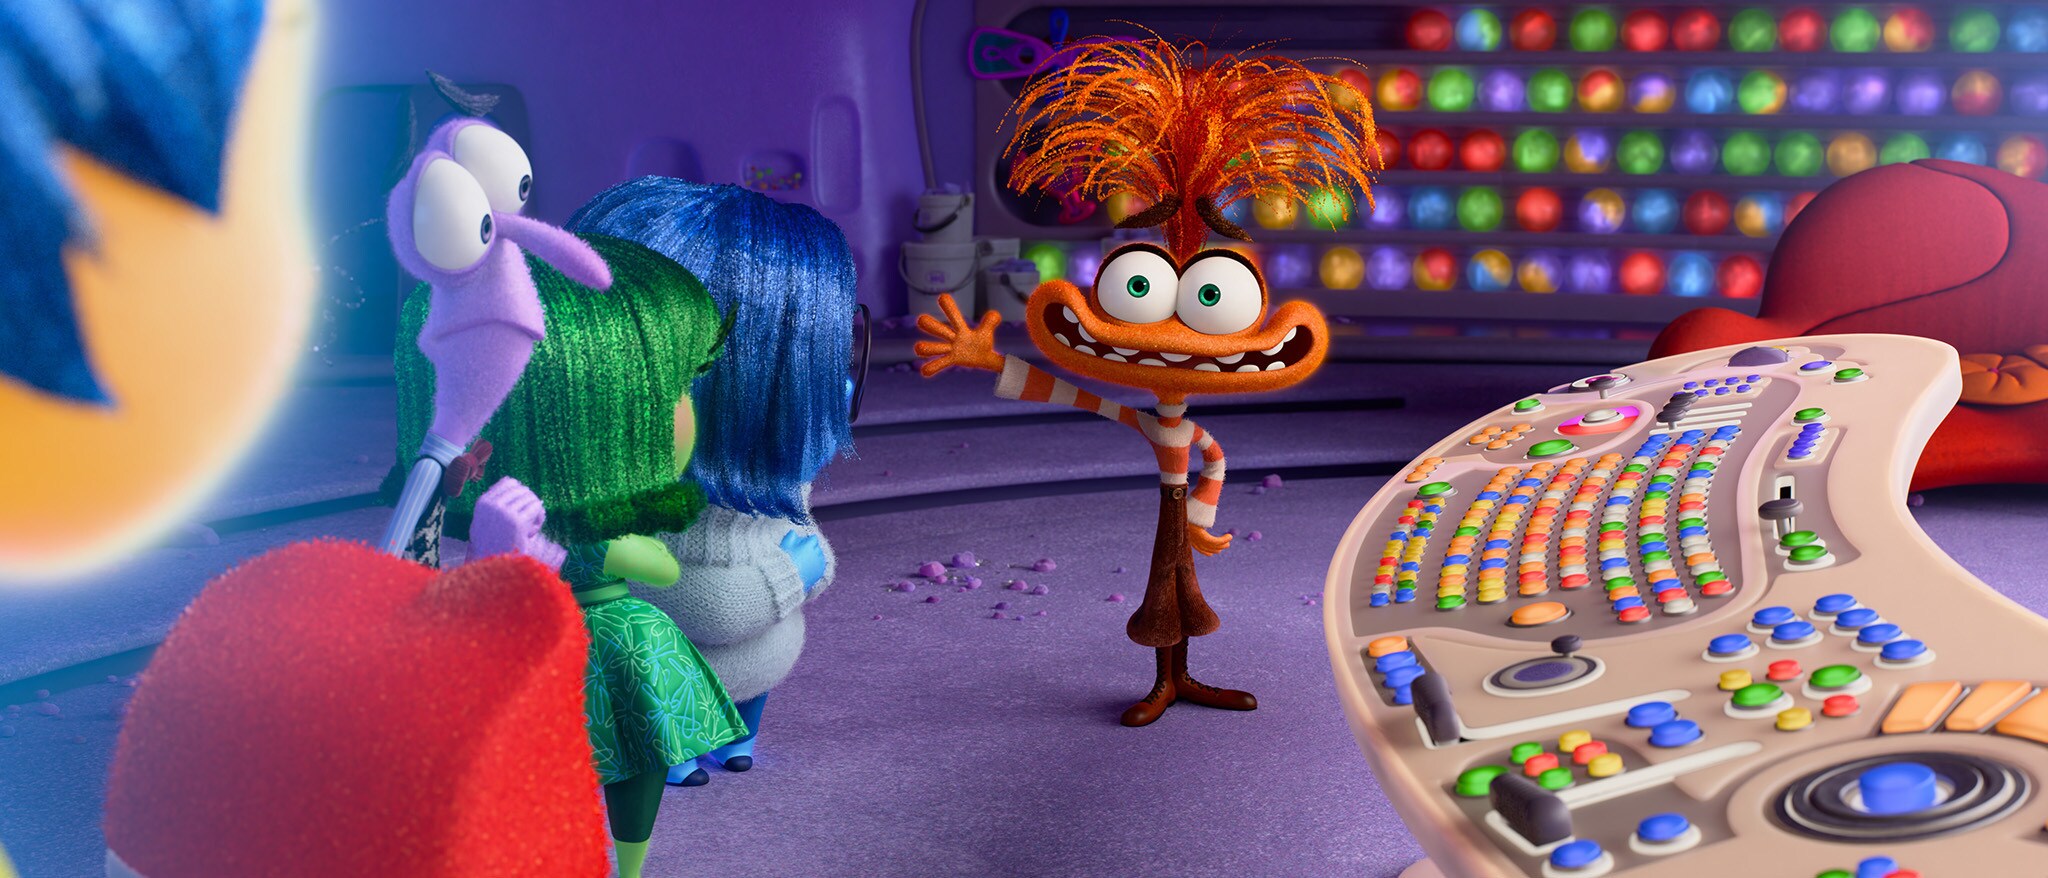 Inside Out 2 - Featured Content Banner